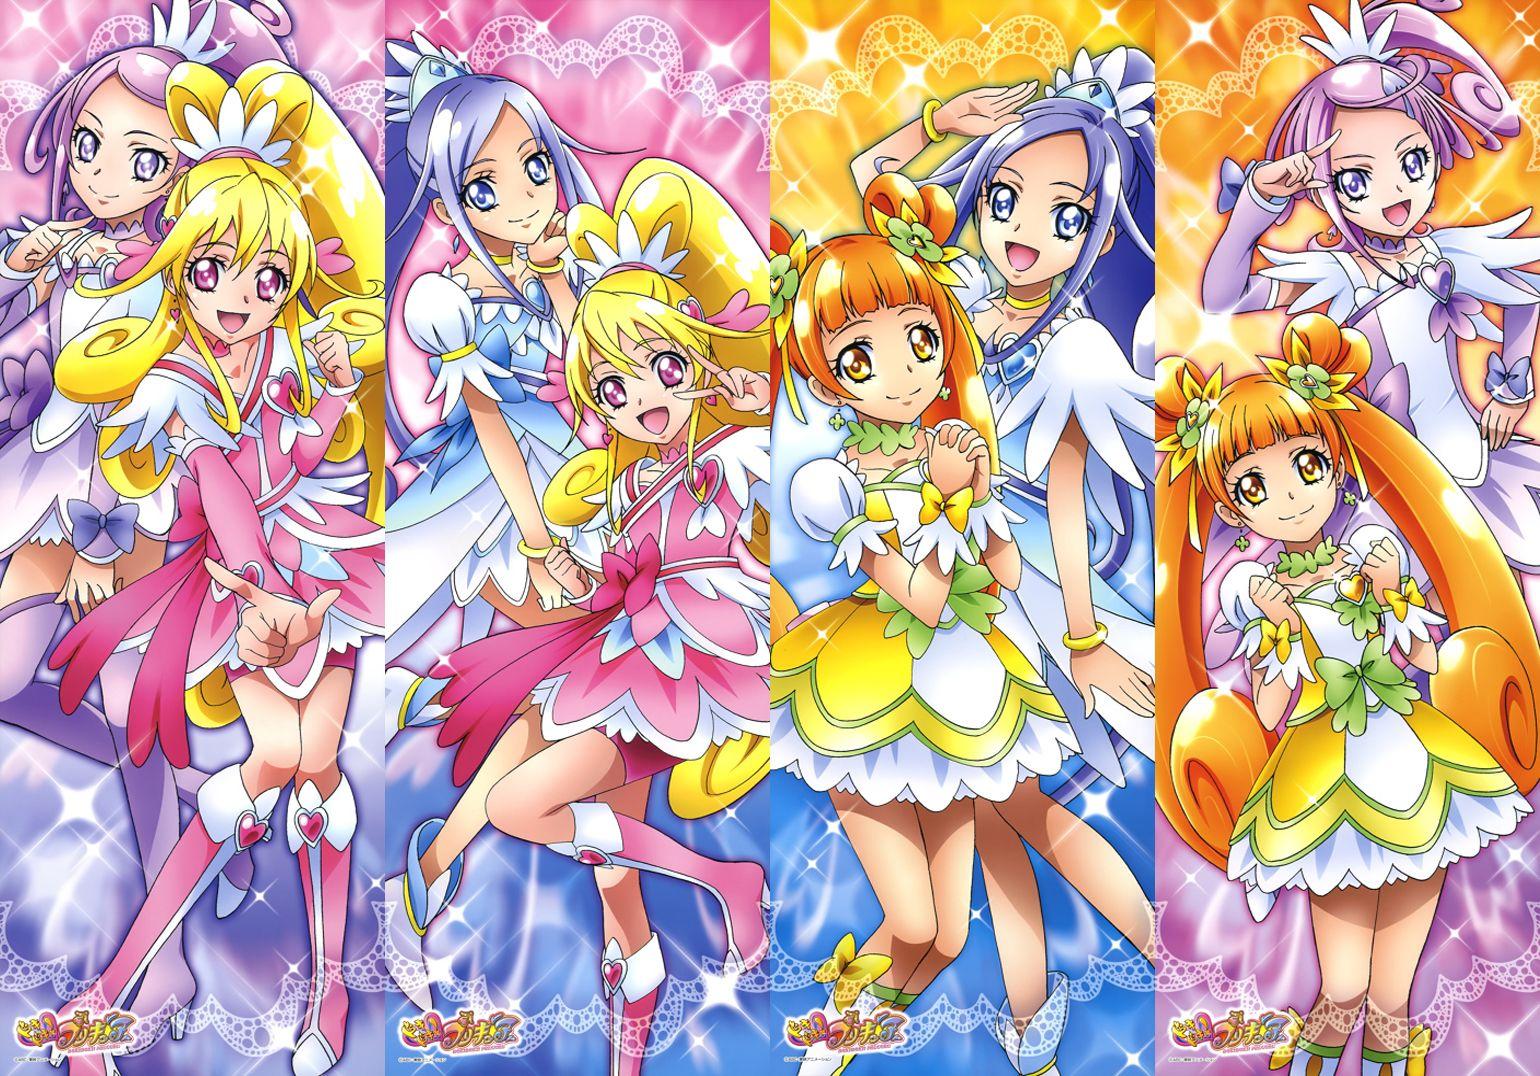 May. Precure all stars